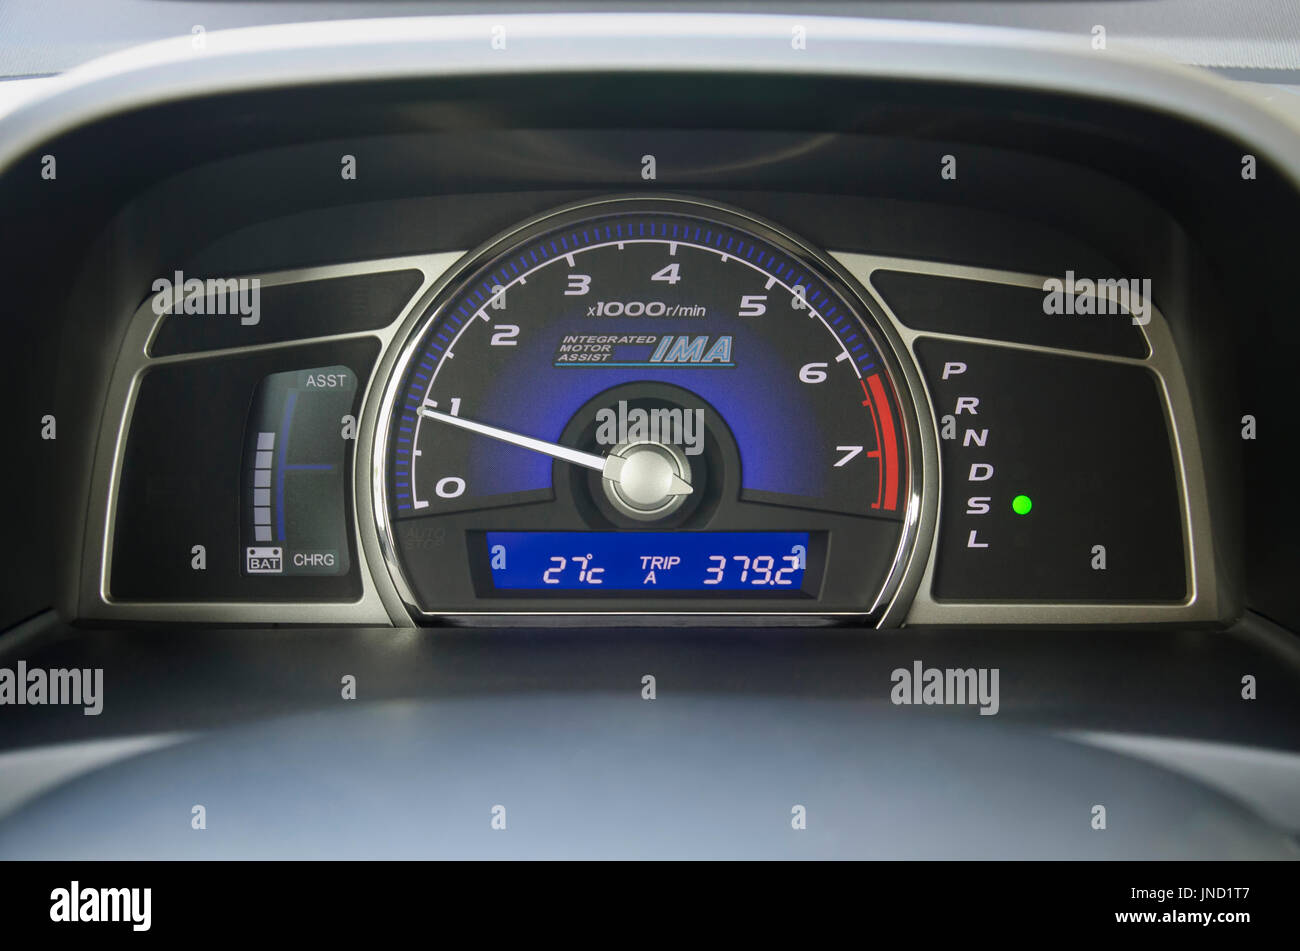 Warsaw, Poland - July 26, 2014: Dashboard of Honda Civic Hybrid car produced in 2009, equipped with Integrated Motor Assist system. IMA is Honda's hyb Stock Photo